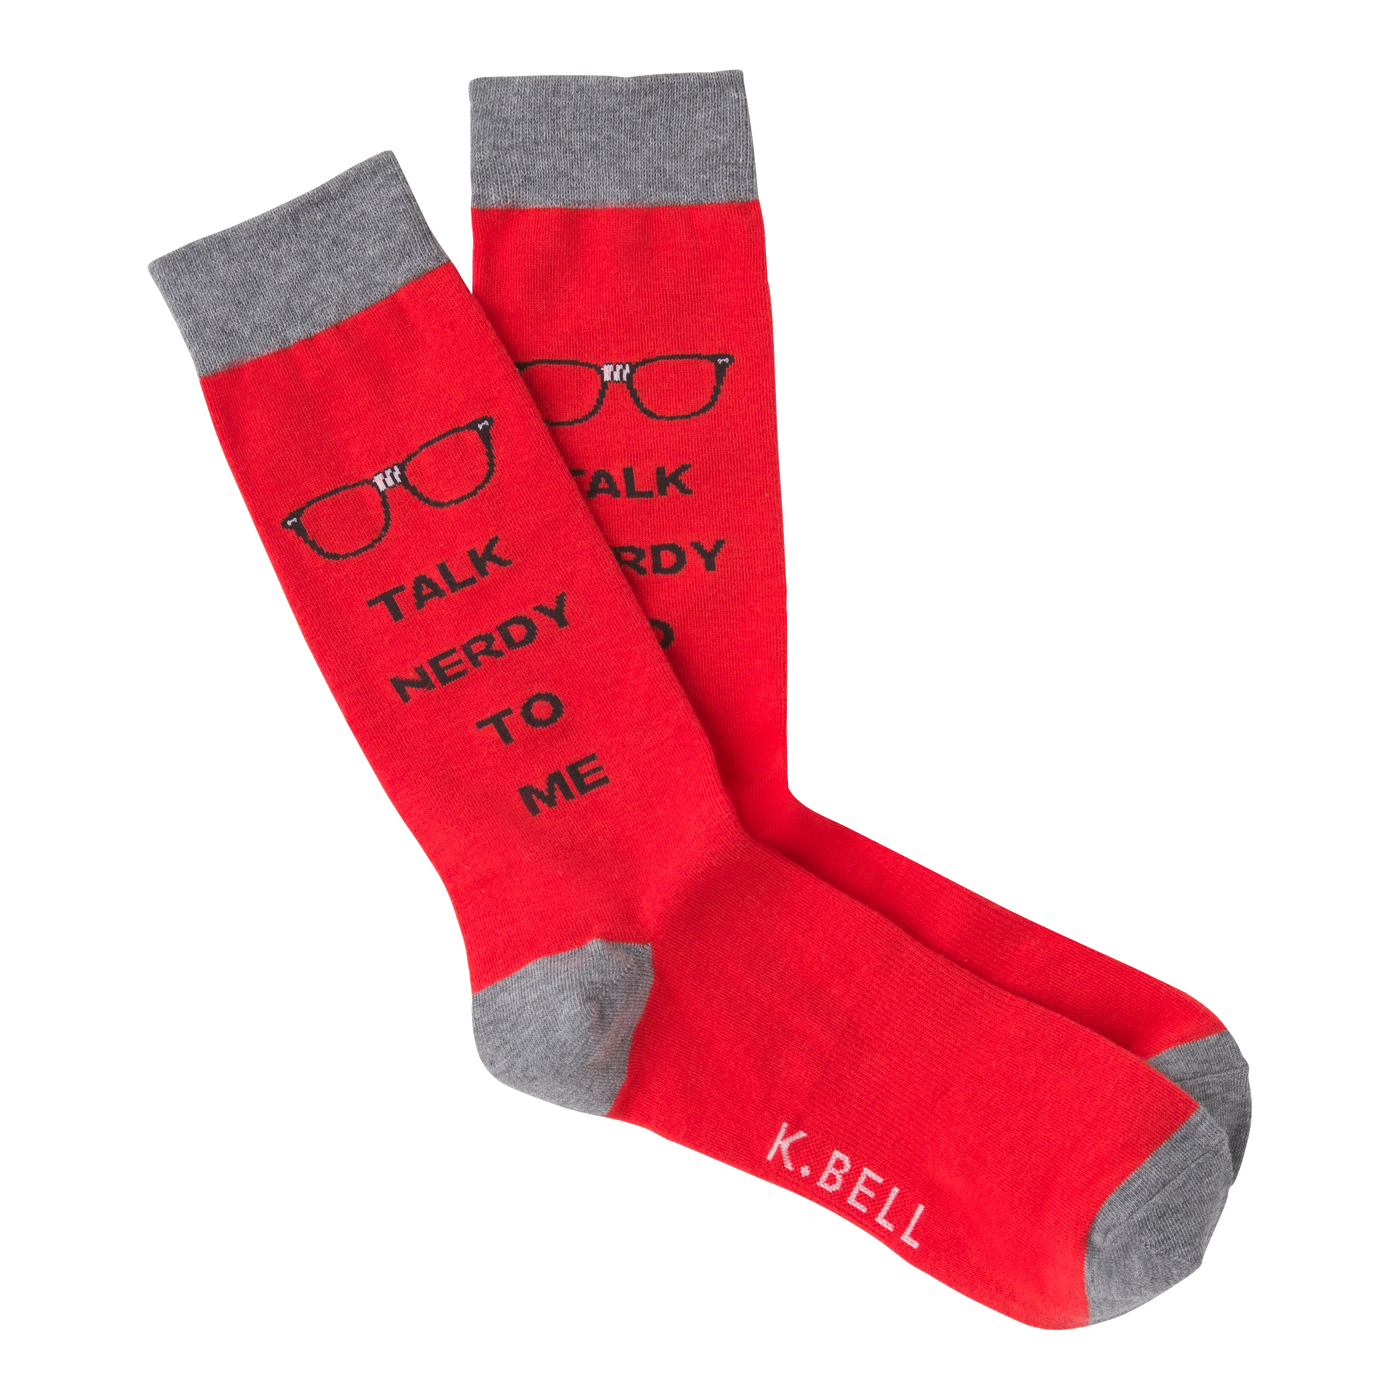 "Talk Nerdy To Me" Crew Socks by K Bell-Large